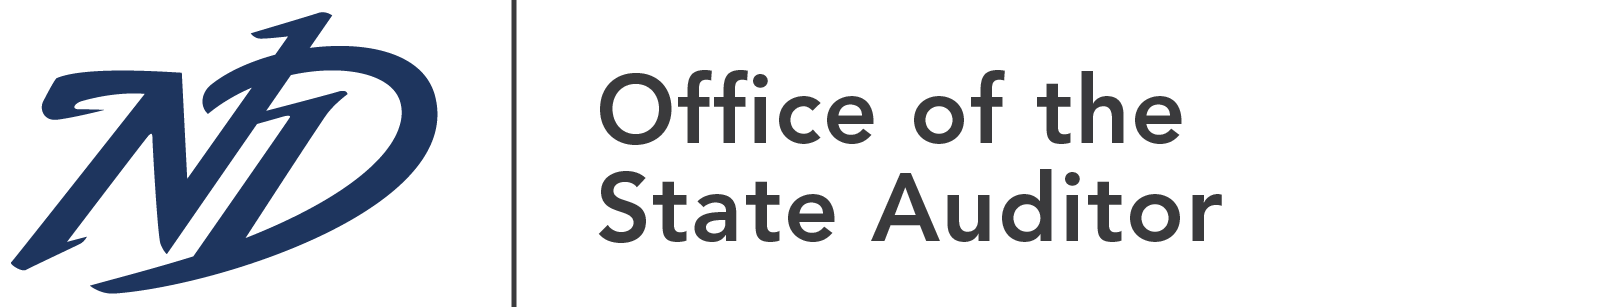 Office of the State Auditor